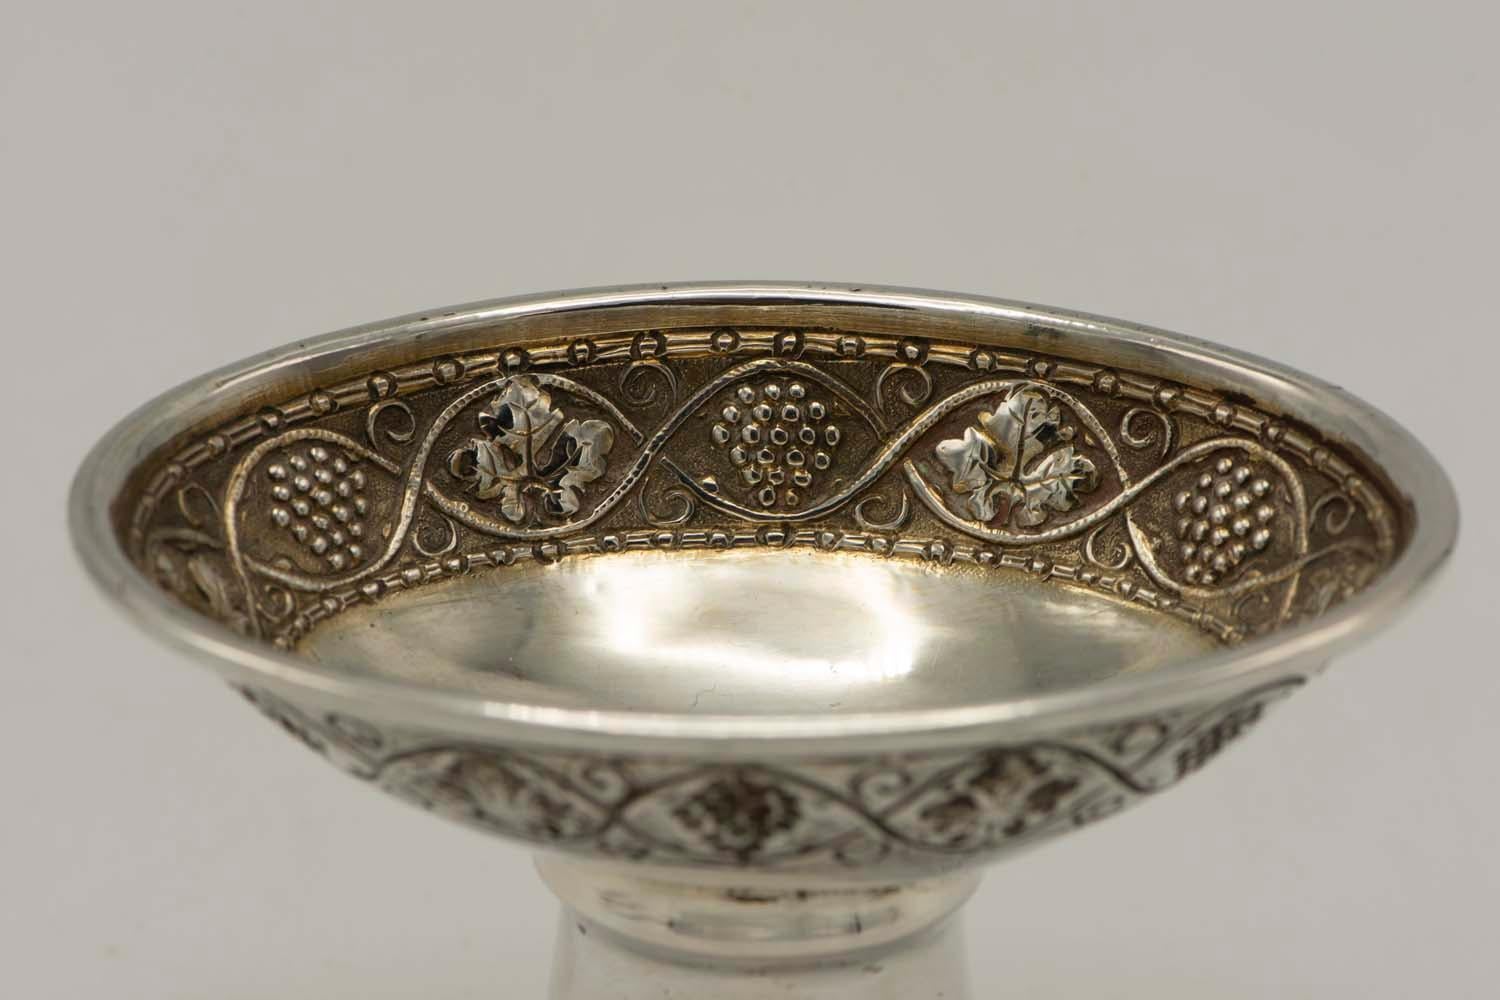 Silver Charoset dish, Felix Horovitz, Frankfurt Am Main, Germany, circa 1905.
The oval small dish is decorated with vine and grapes, the base is decorated with Stars of David and small stars.
Marked with German silver marks (800, half moon and